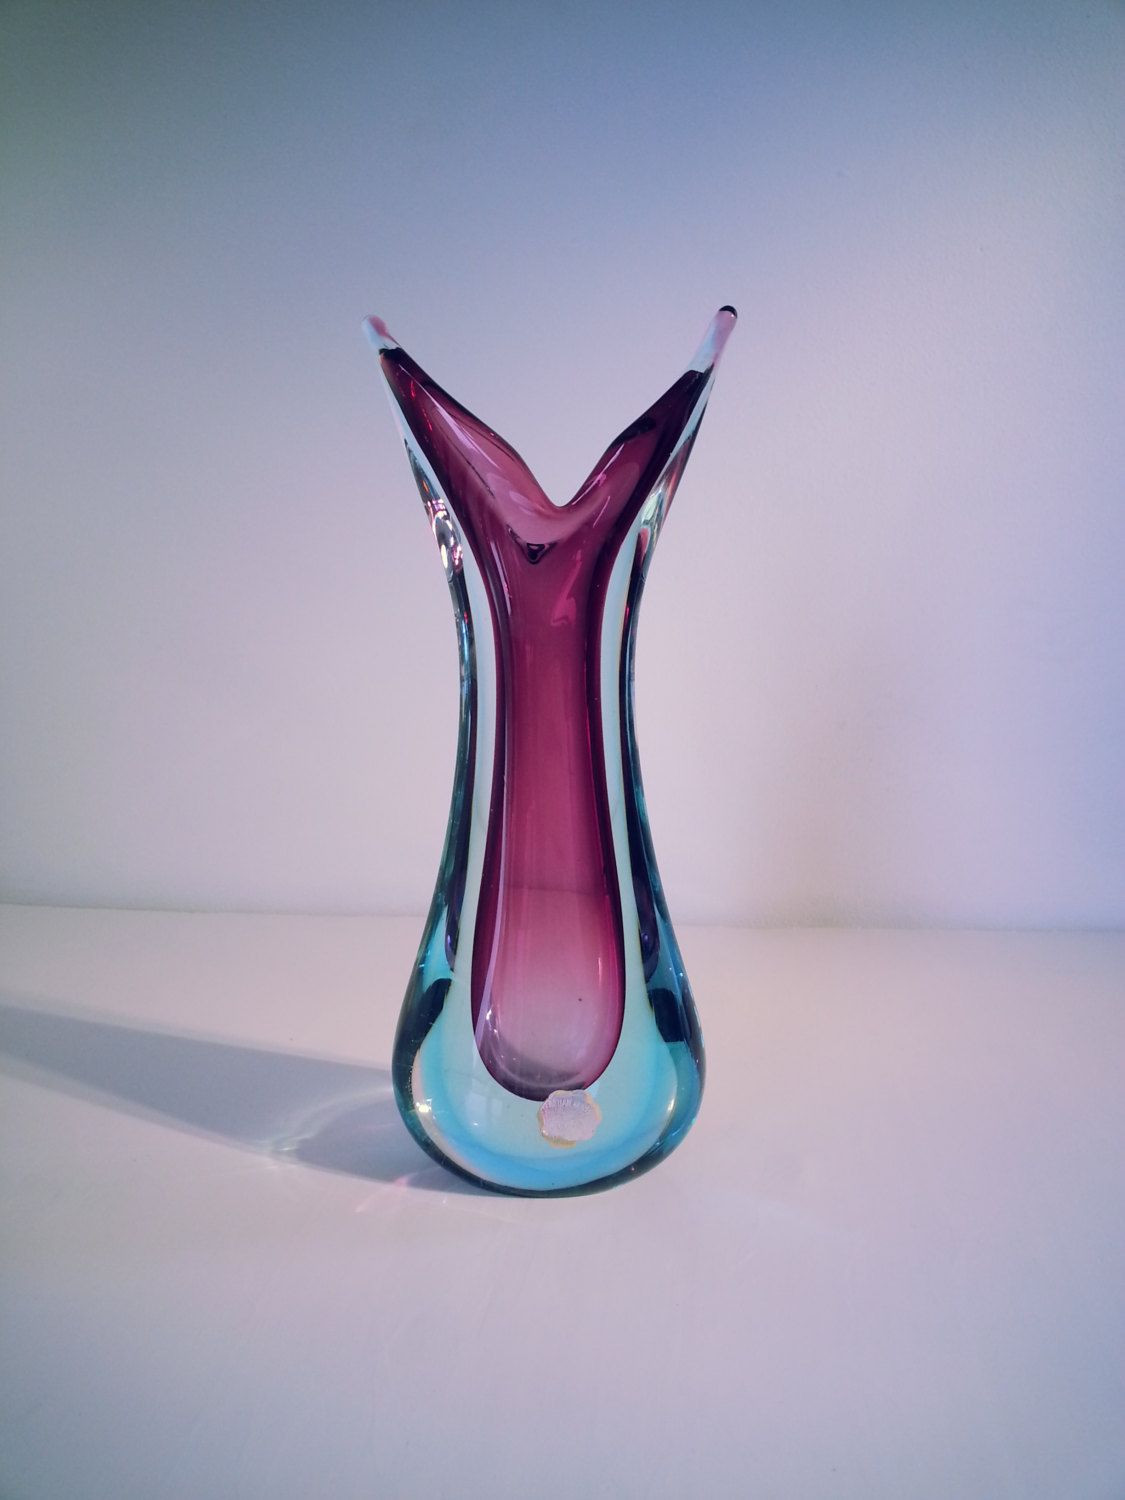 22 Stylish Faceted Glass Vase 2024 free download faceted glass vase of murano sommerso genuine venetian glass 1950s 1960s purple blue in murano sommerso genuine venetian glass 1950s 1960s purple blue glass vase pulled design vase made in i